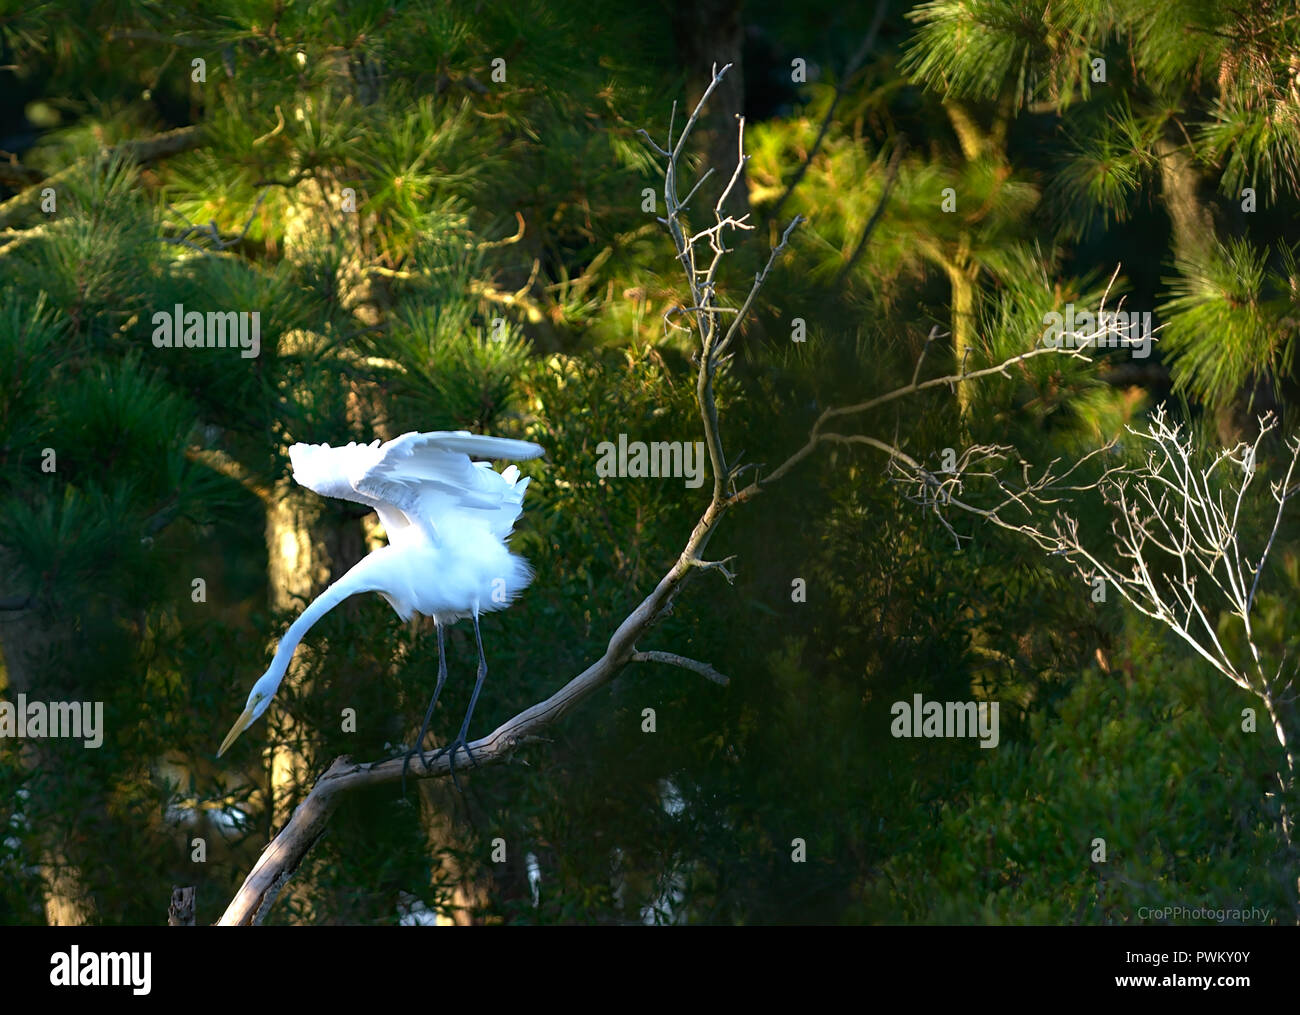 Egret  on tree branch flapping wings with neck stretched out Stock Photo